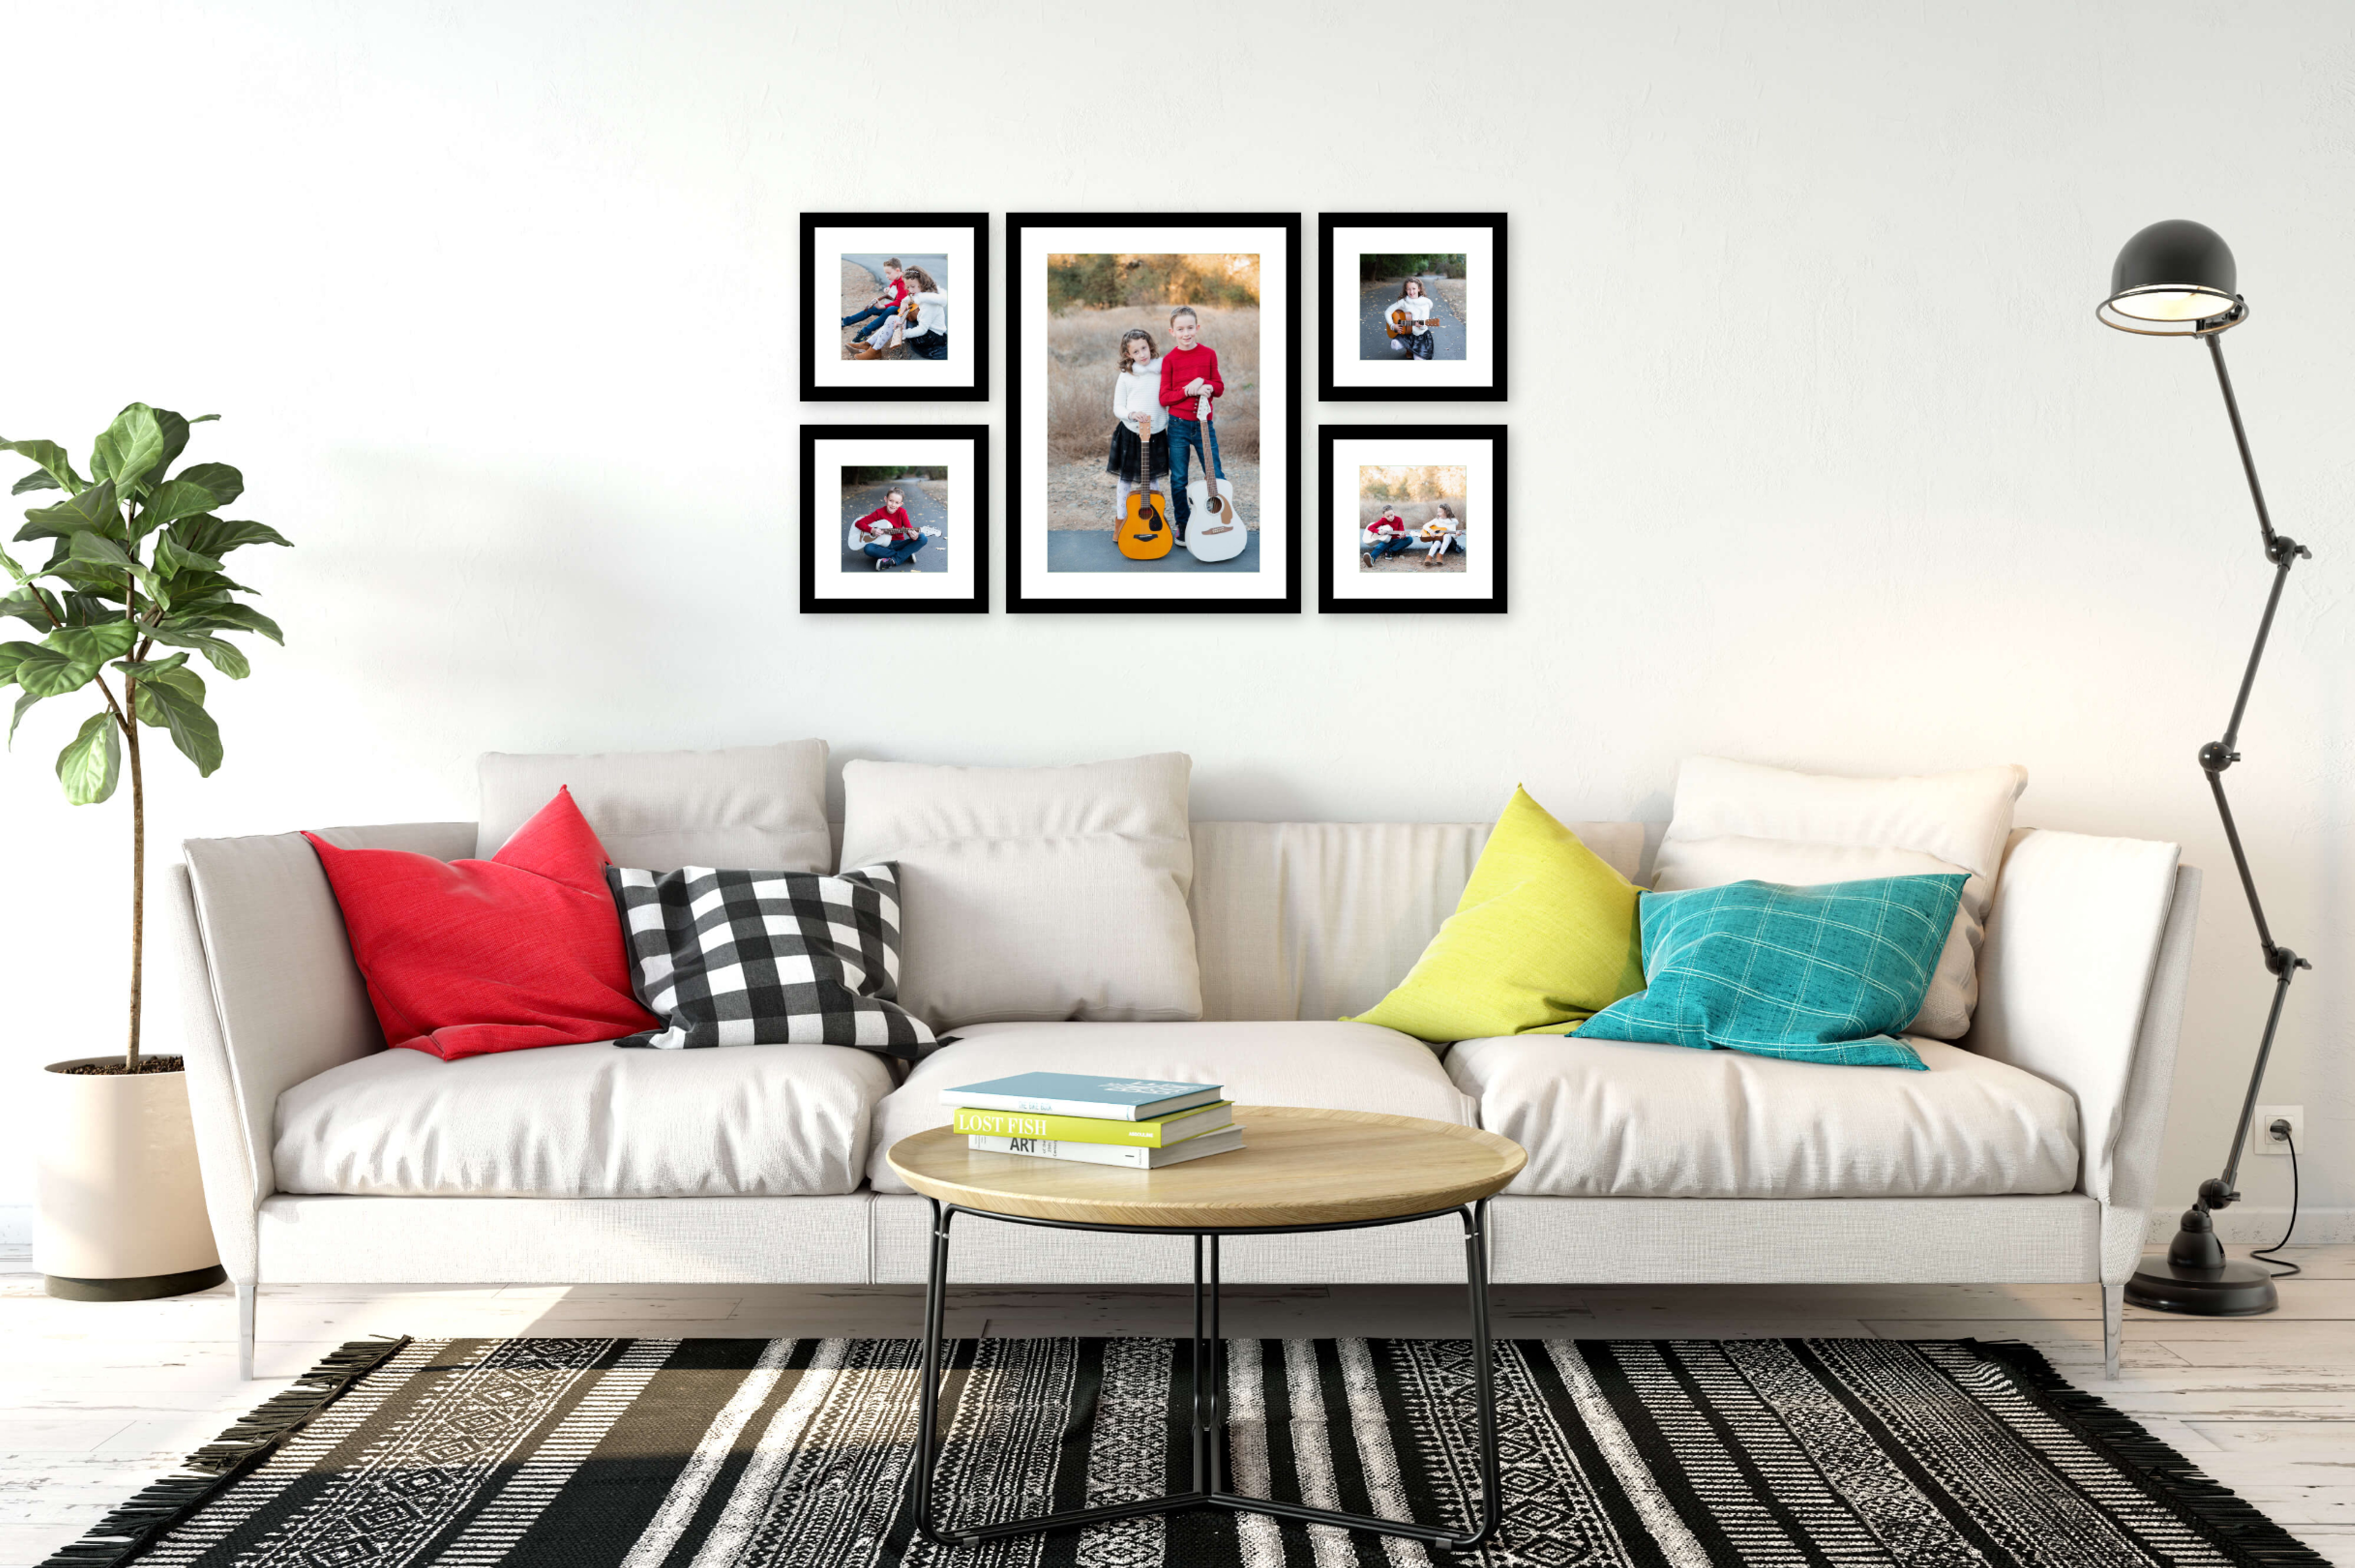 framed family portrait wall gallery hanging over couch